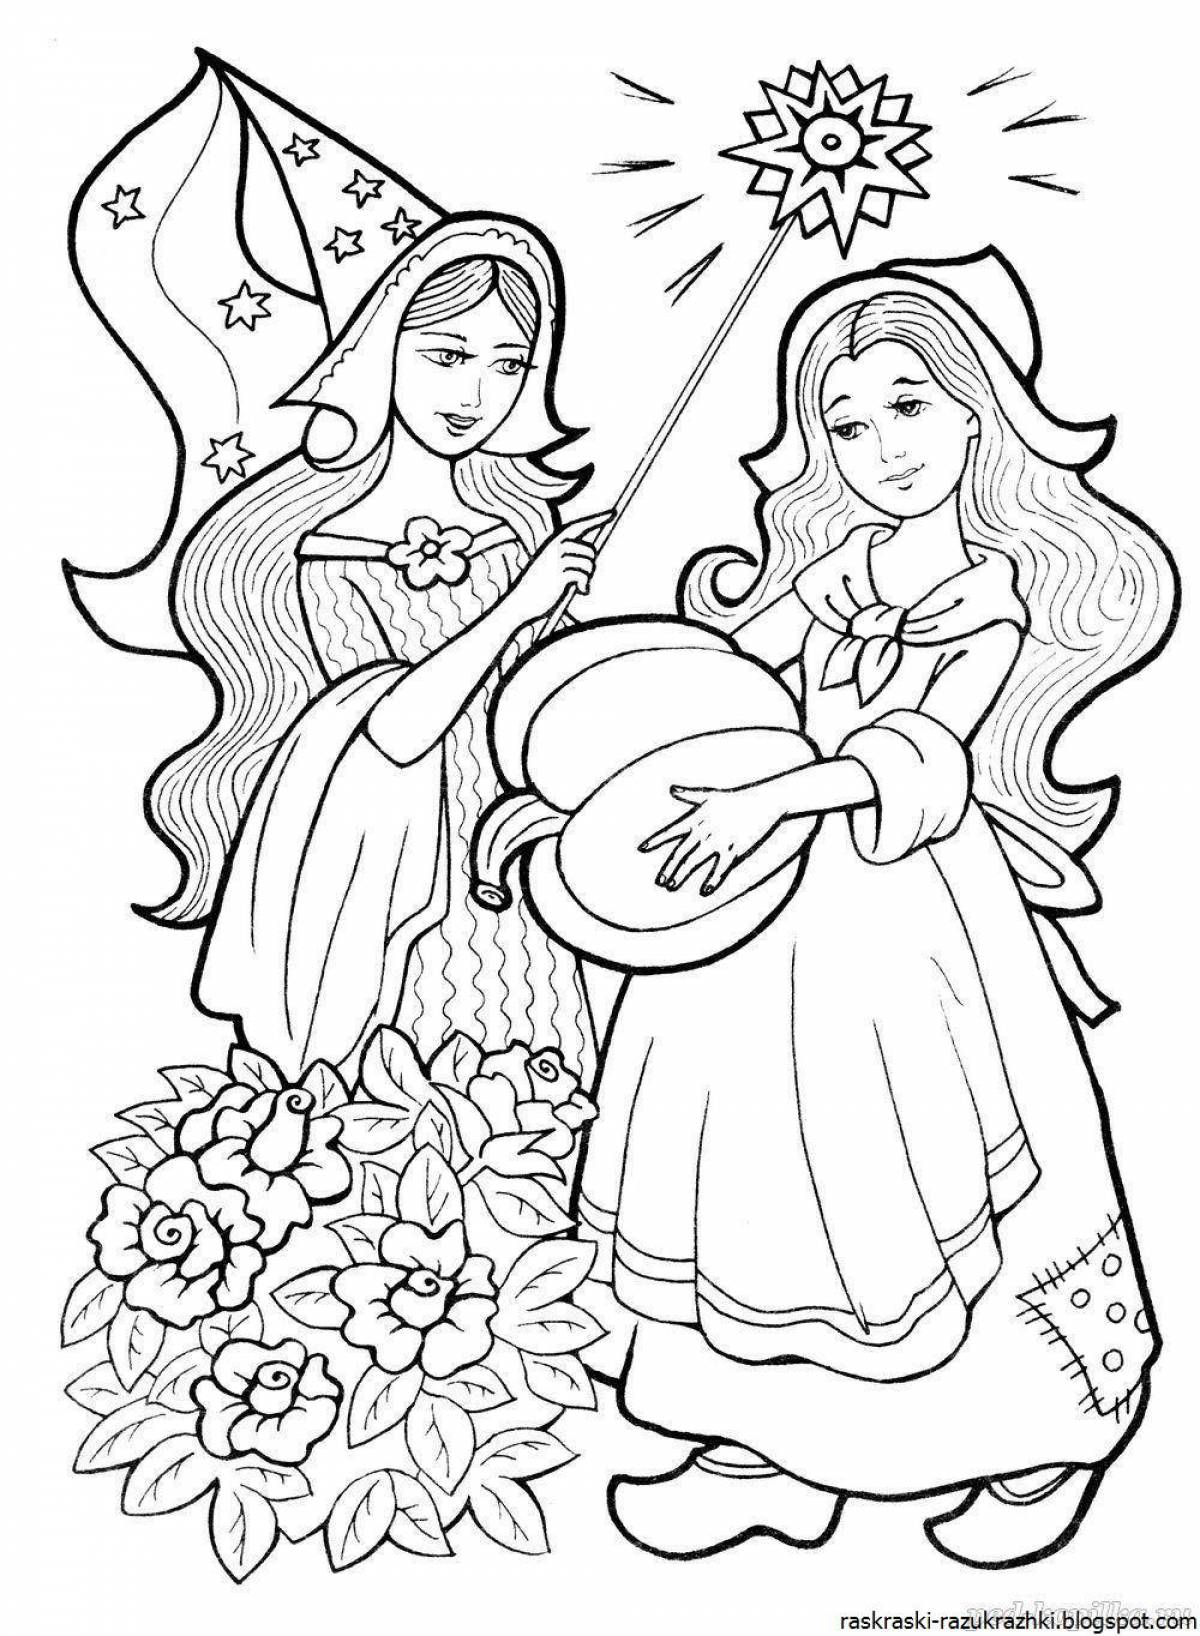 Charles Perrault's quirky coloring pages